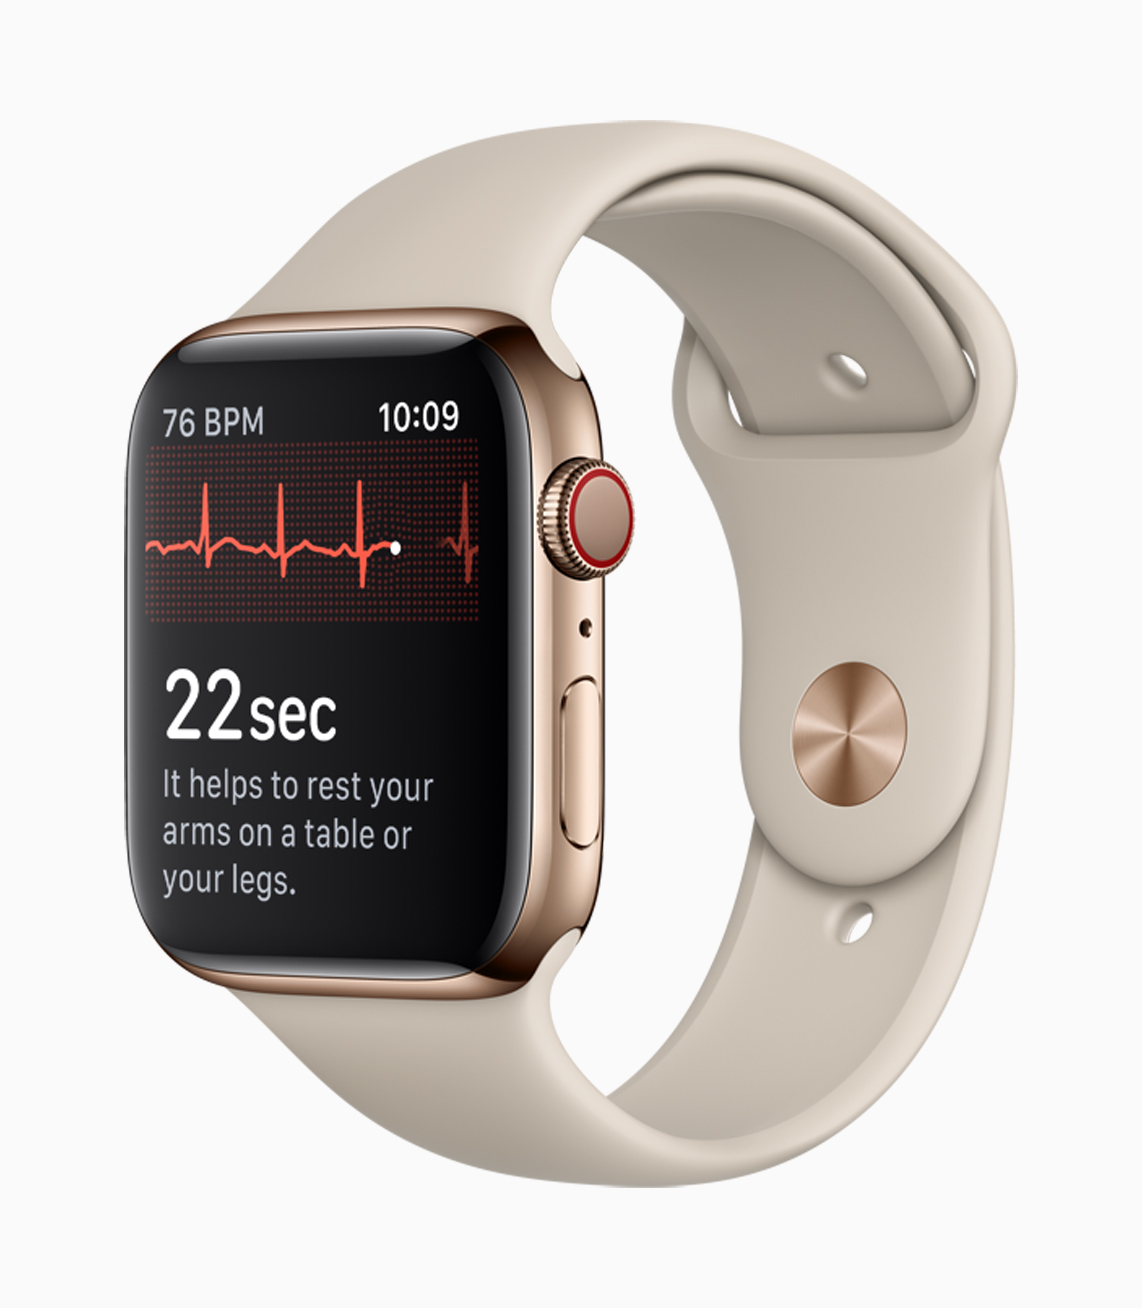 The Apple Watch is evolving into a legitimate medical device